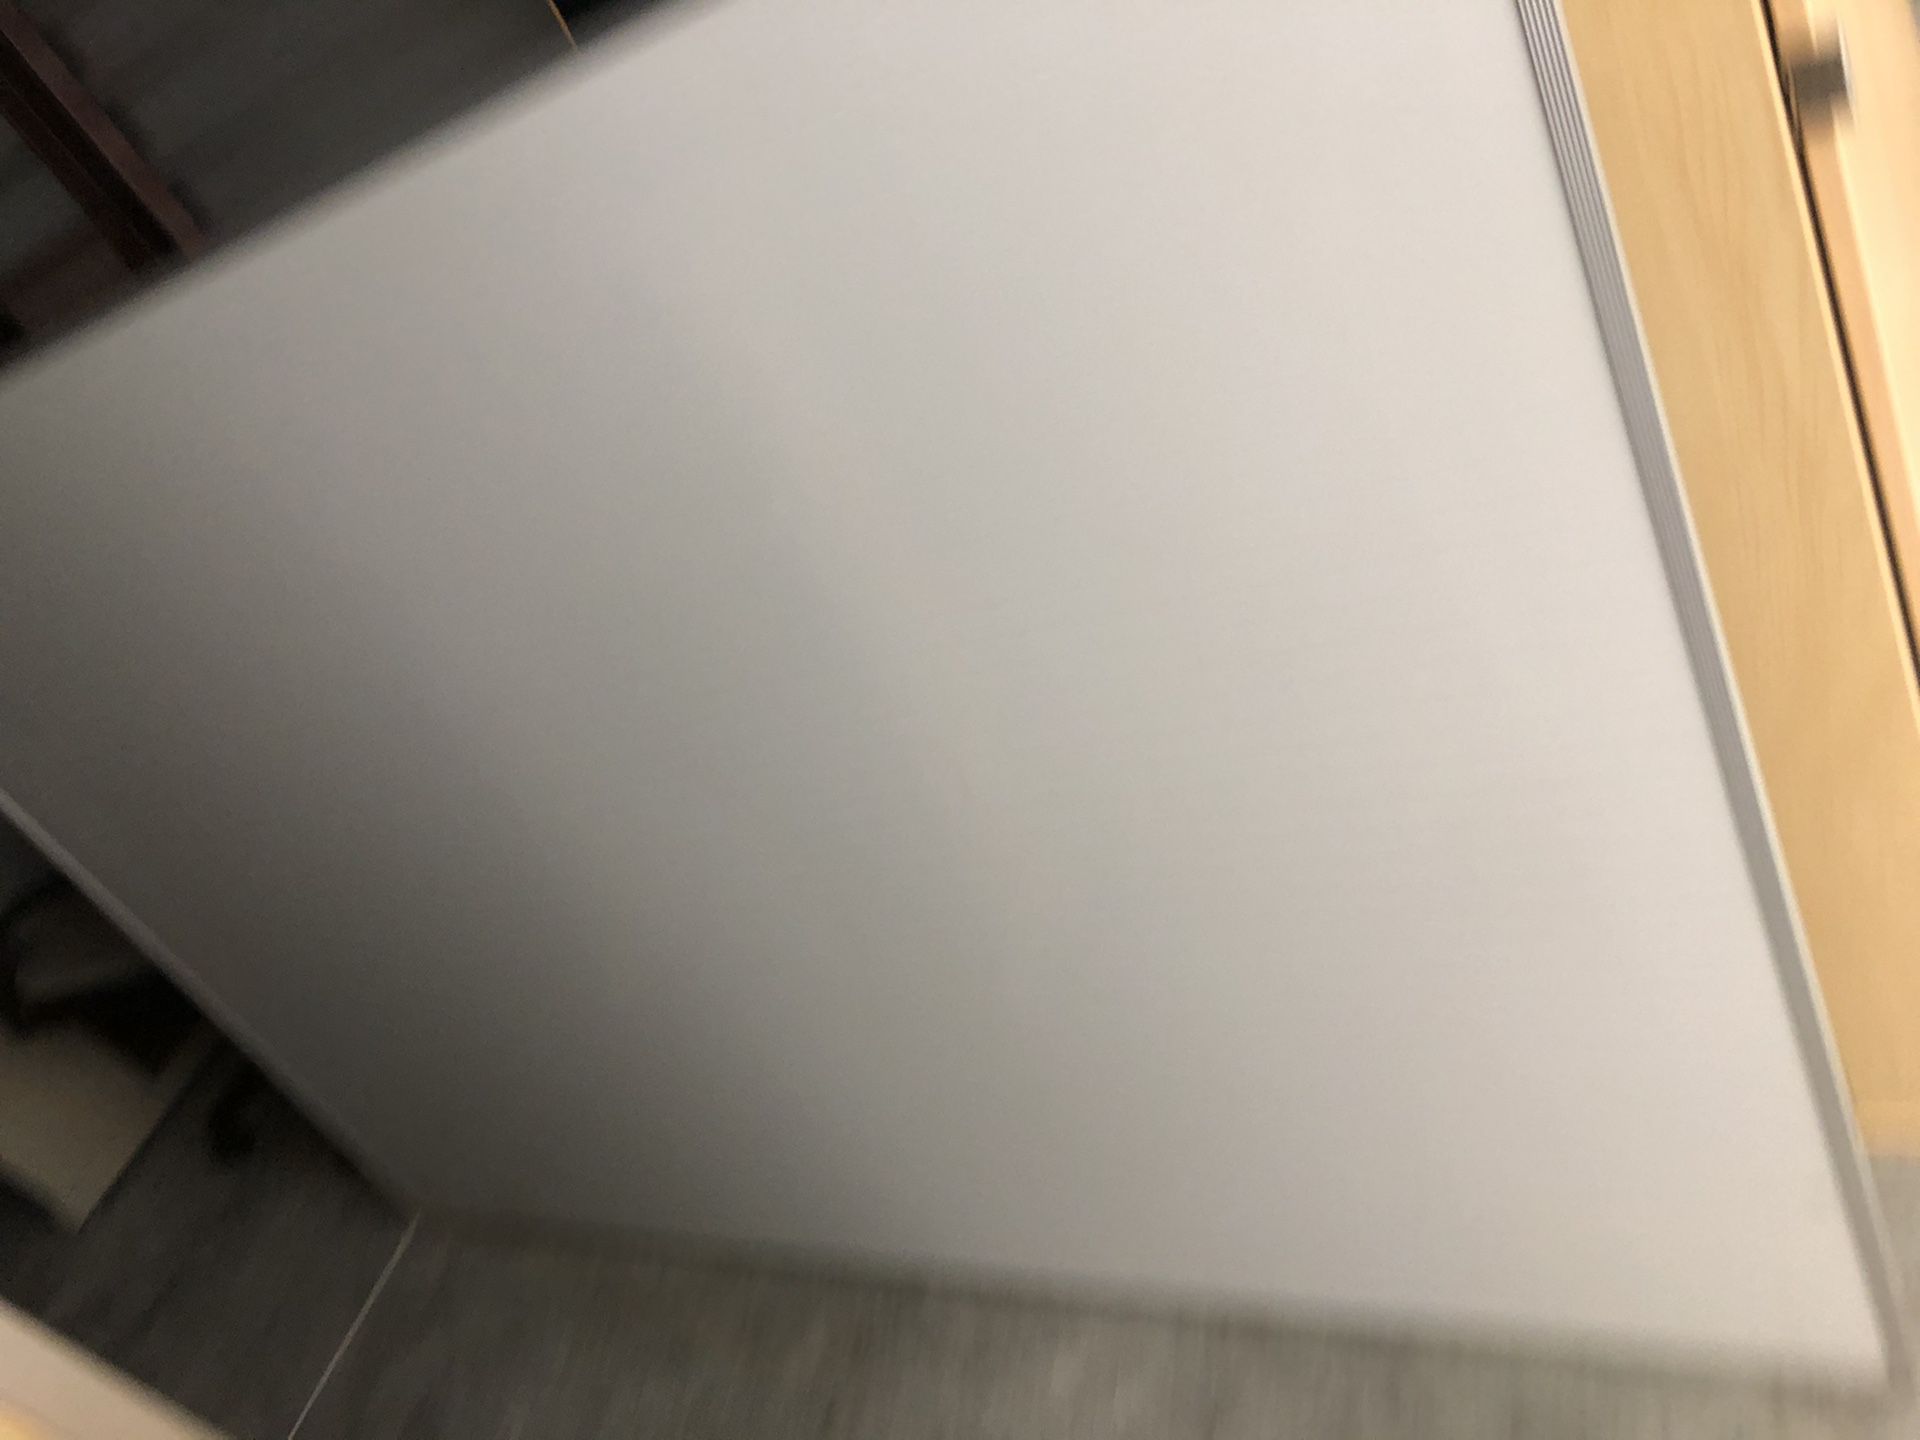 6x4 ‘ magnetic whiteboard in excellent condition for sale